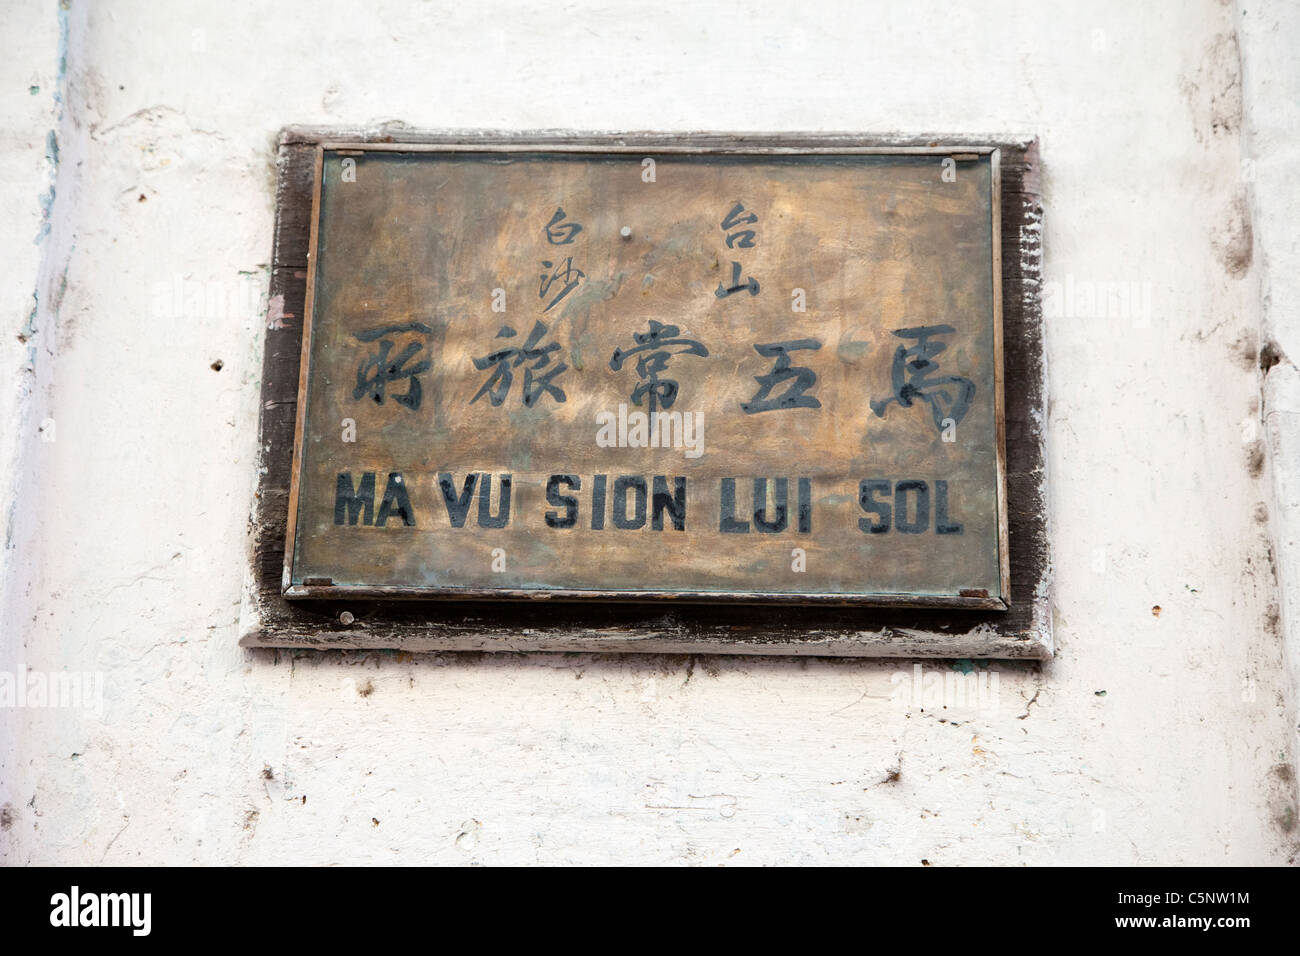 Cuba, Havana. Identity Plaque on a Building in China Town. Stock Photo